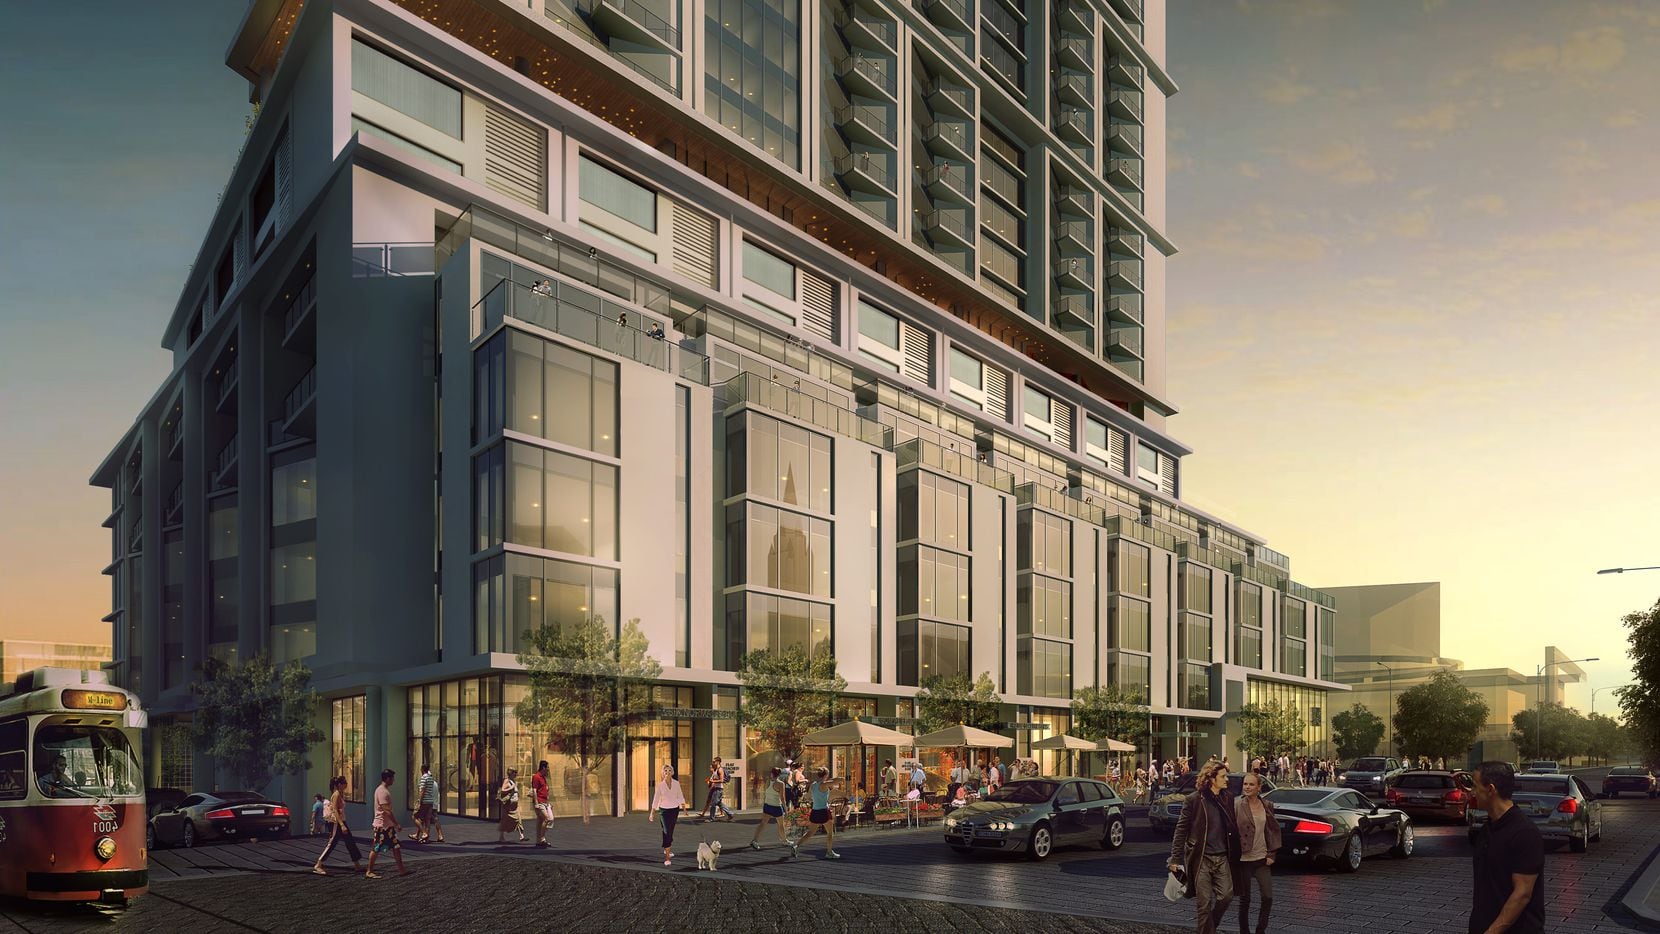 The Atelier apartments will be built in downtown Dallas' Arts District.